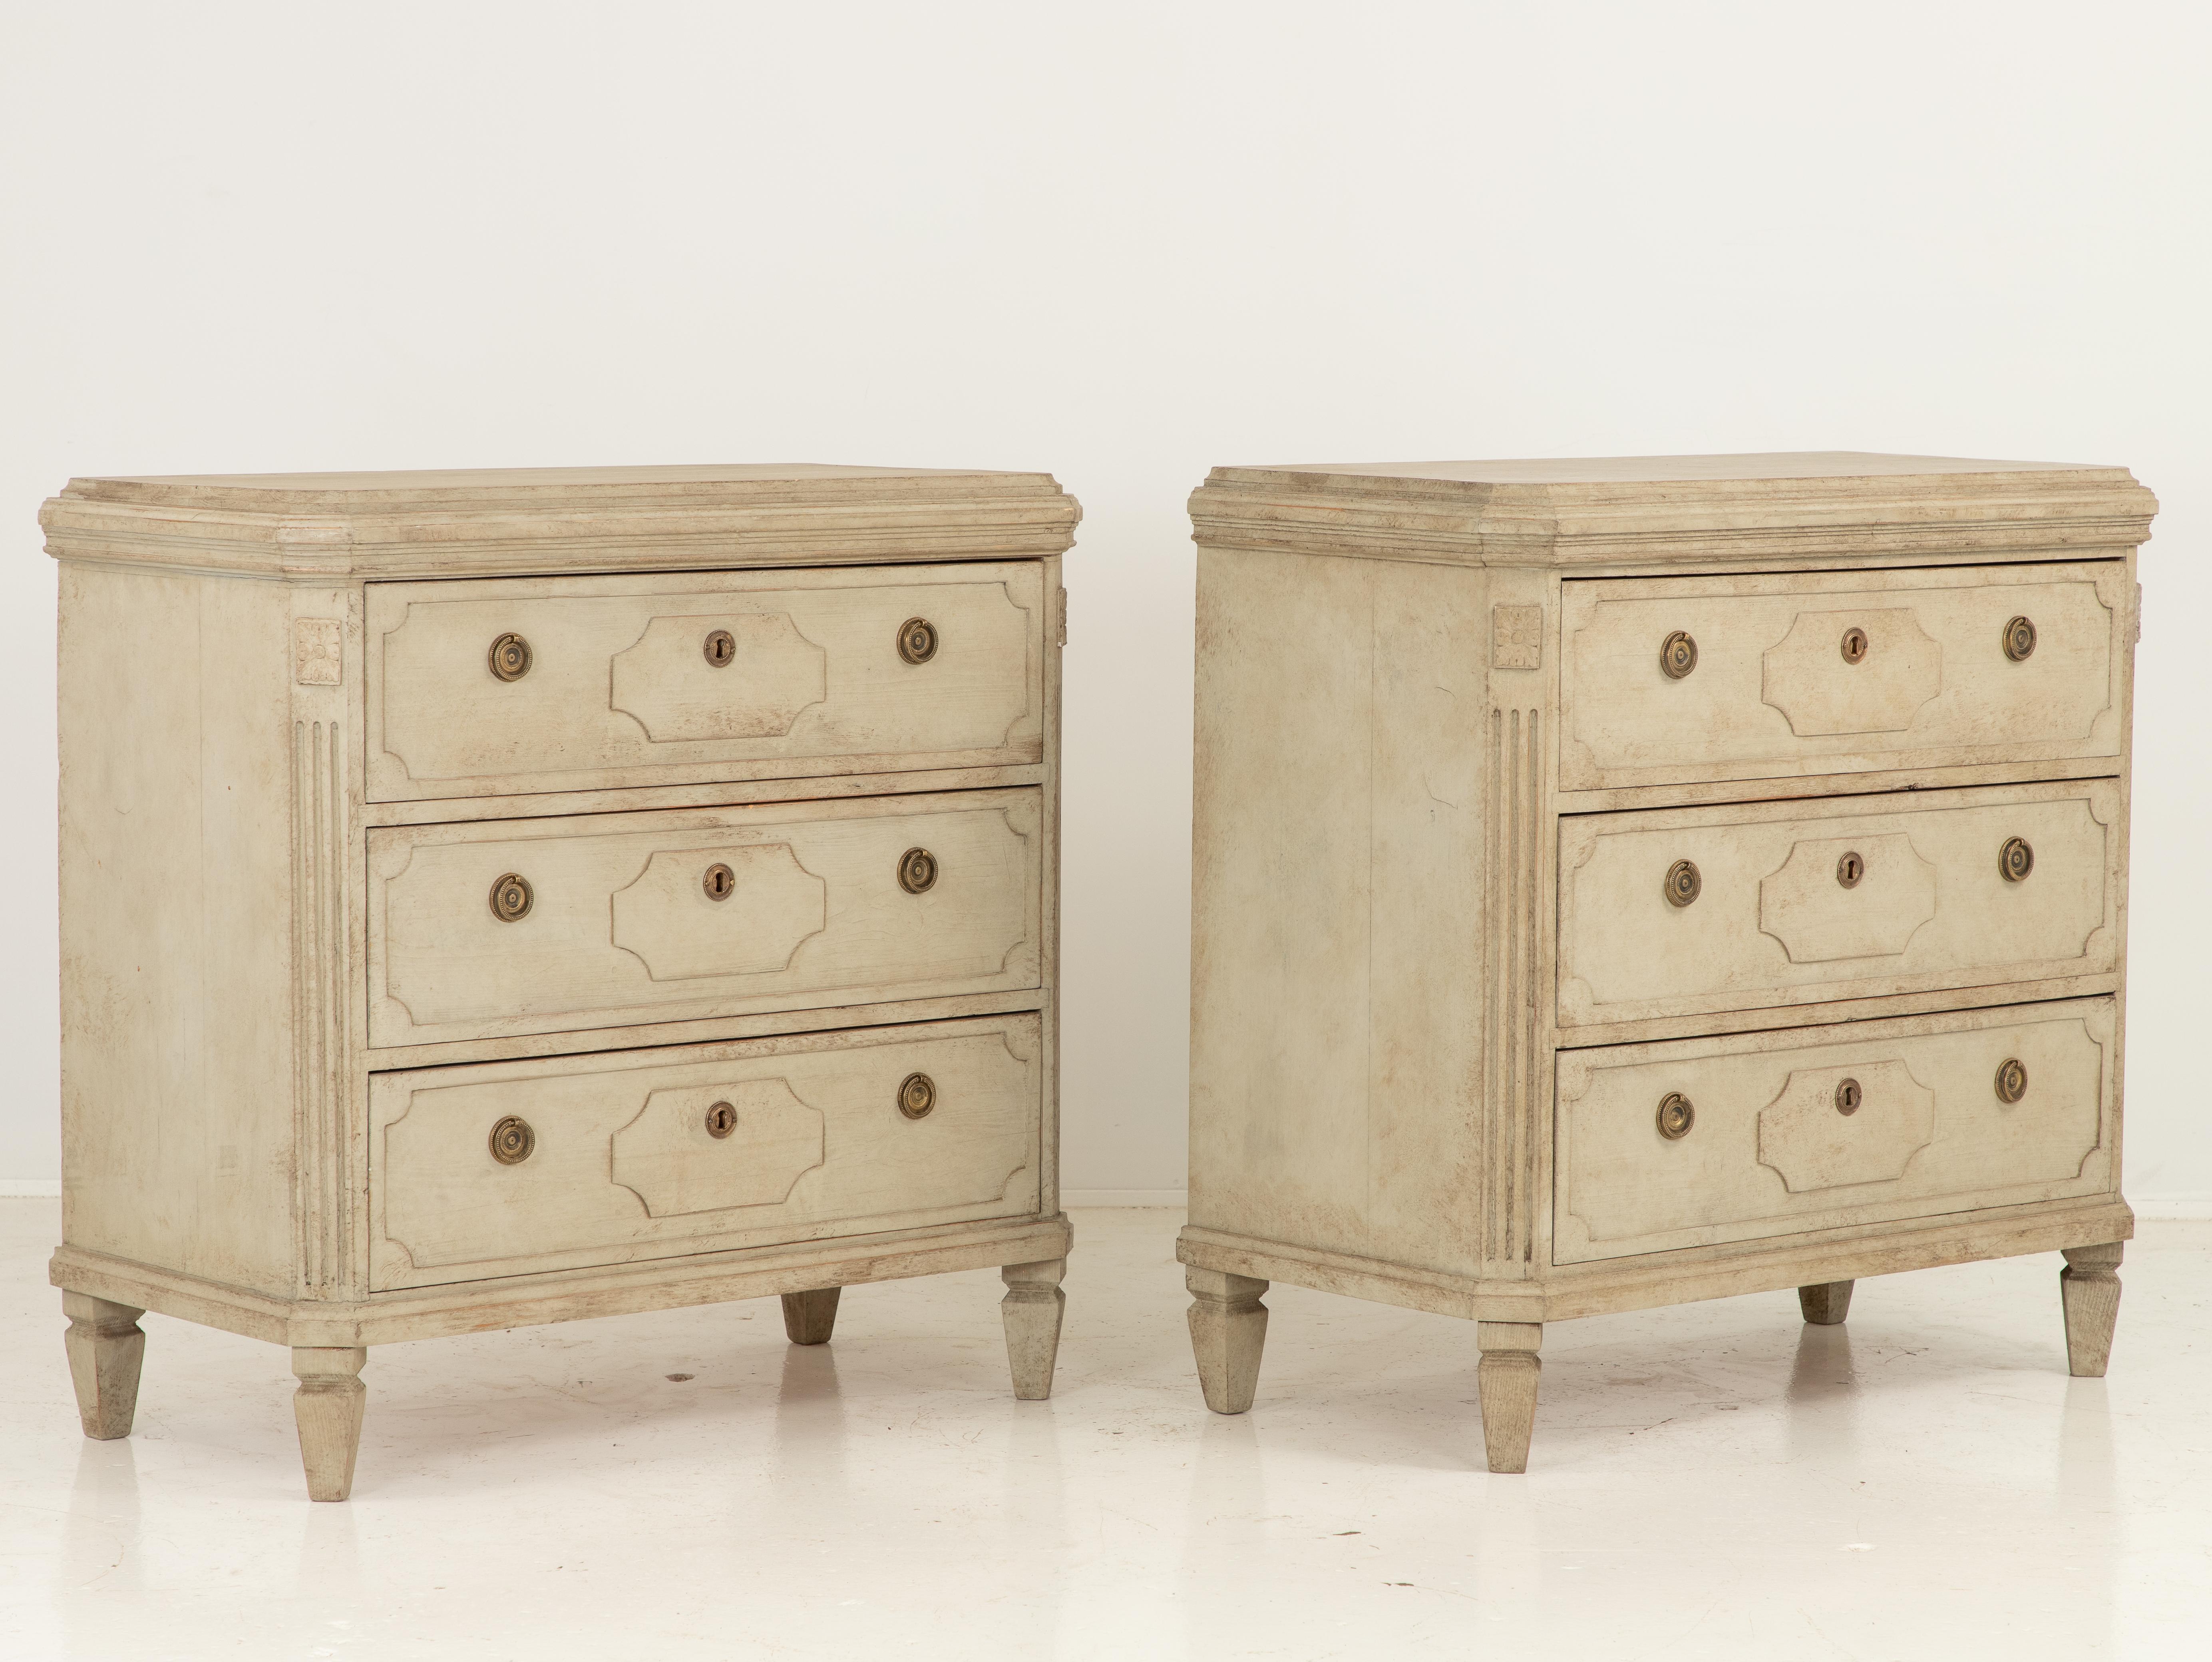 20th Century Antique Gustavian Style Chests of Drawers, a Pair For Sale